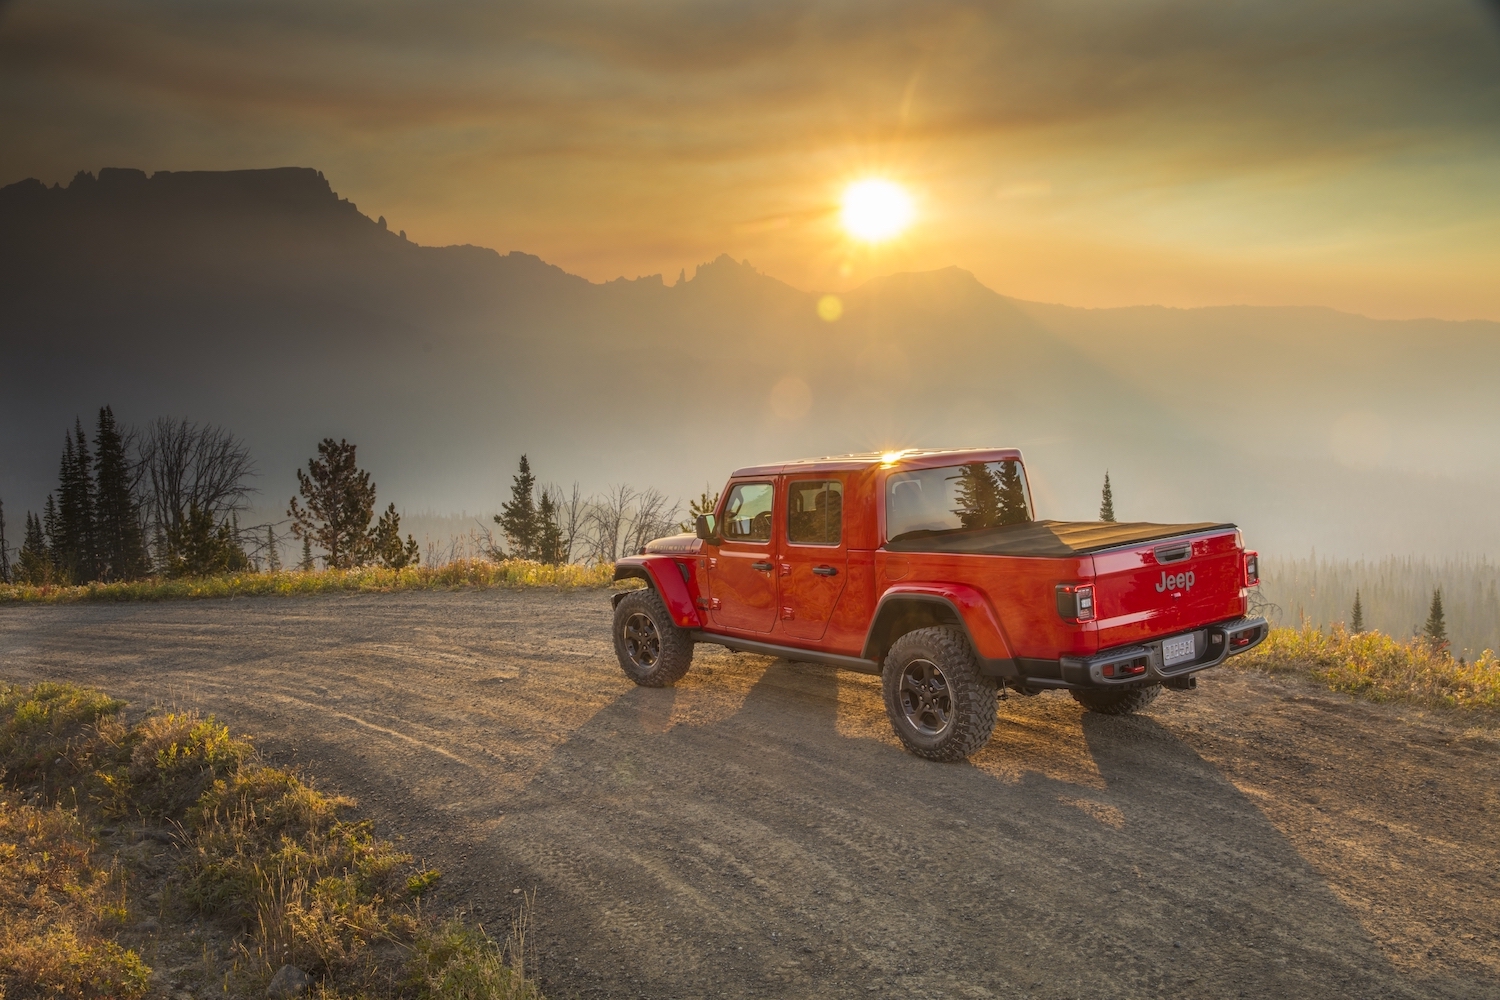 Promo photo of a red Jeep Gladiator 4WD truck navigating a dirt road, the sun setting behind a mountain range visible in the background.